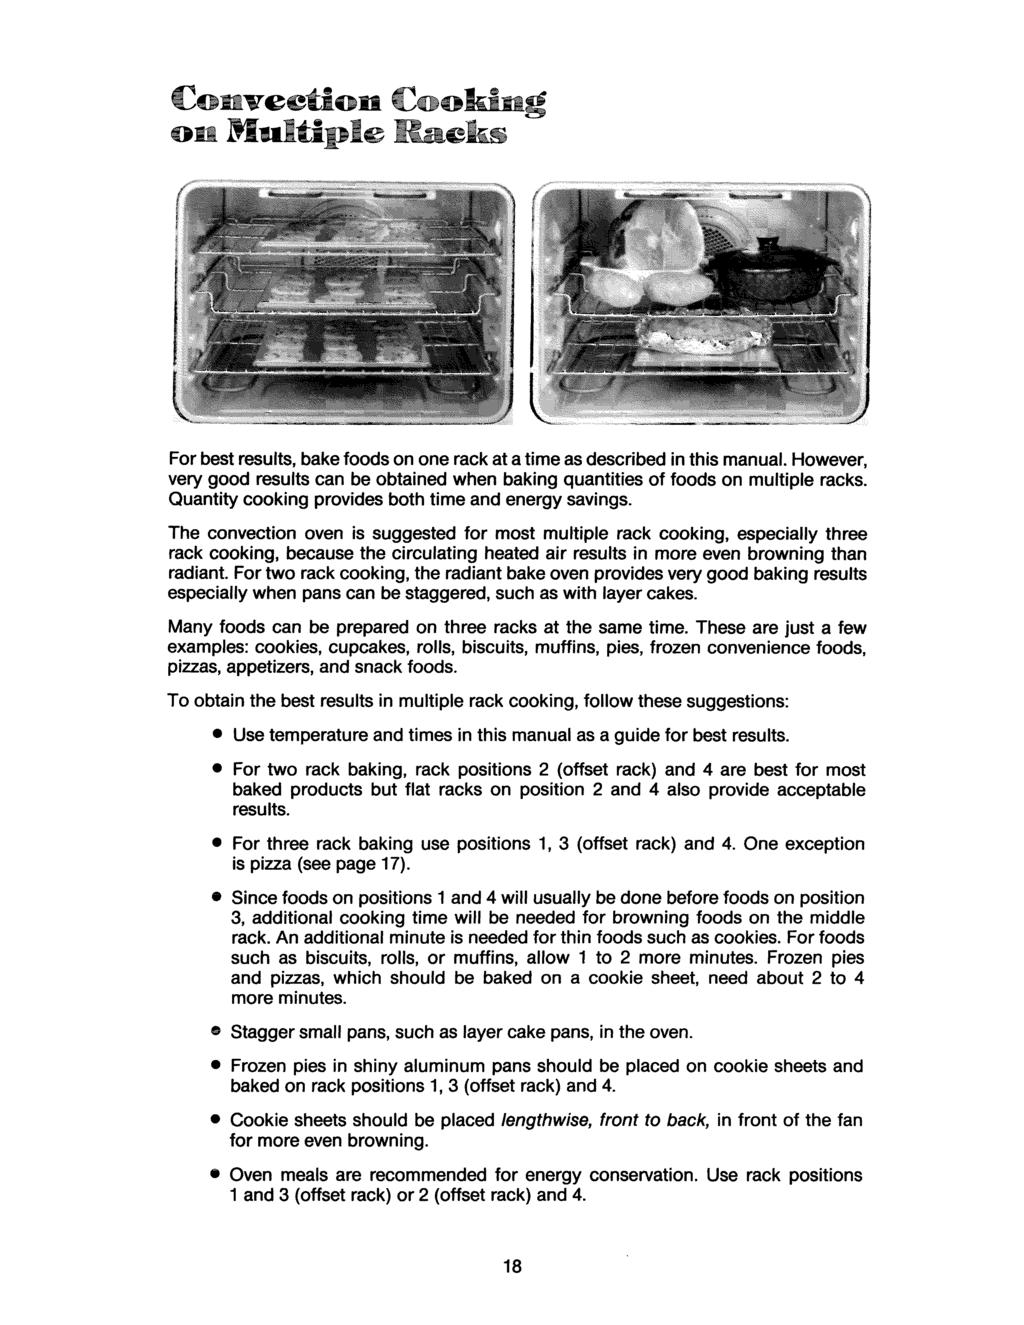 o vectlon Coo g MuJtiple For best results, bake foods on one rack at a time as described in this manual. However, very good results can be obtained when baking quantities of foods on multiple racks.